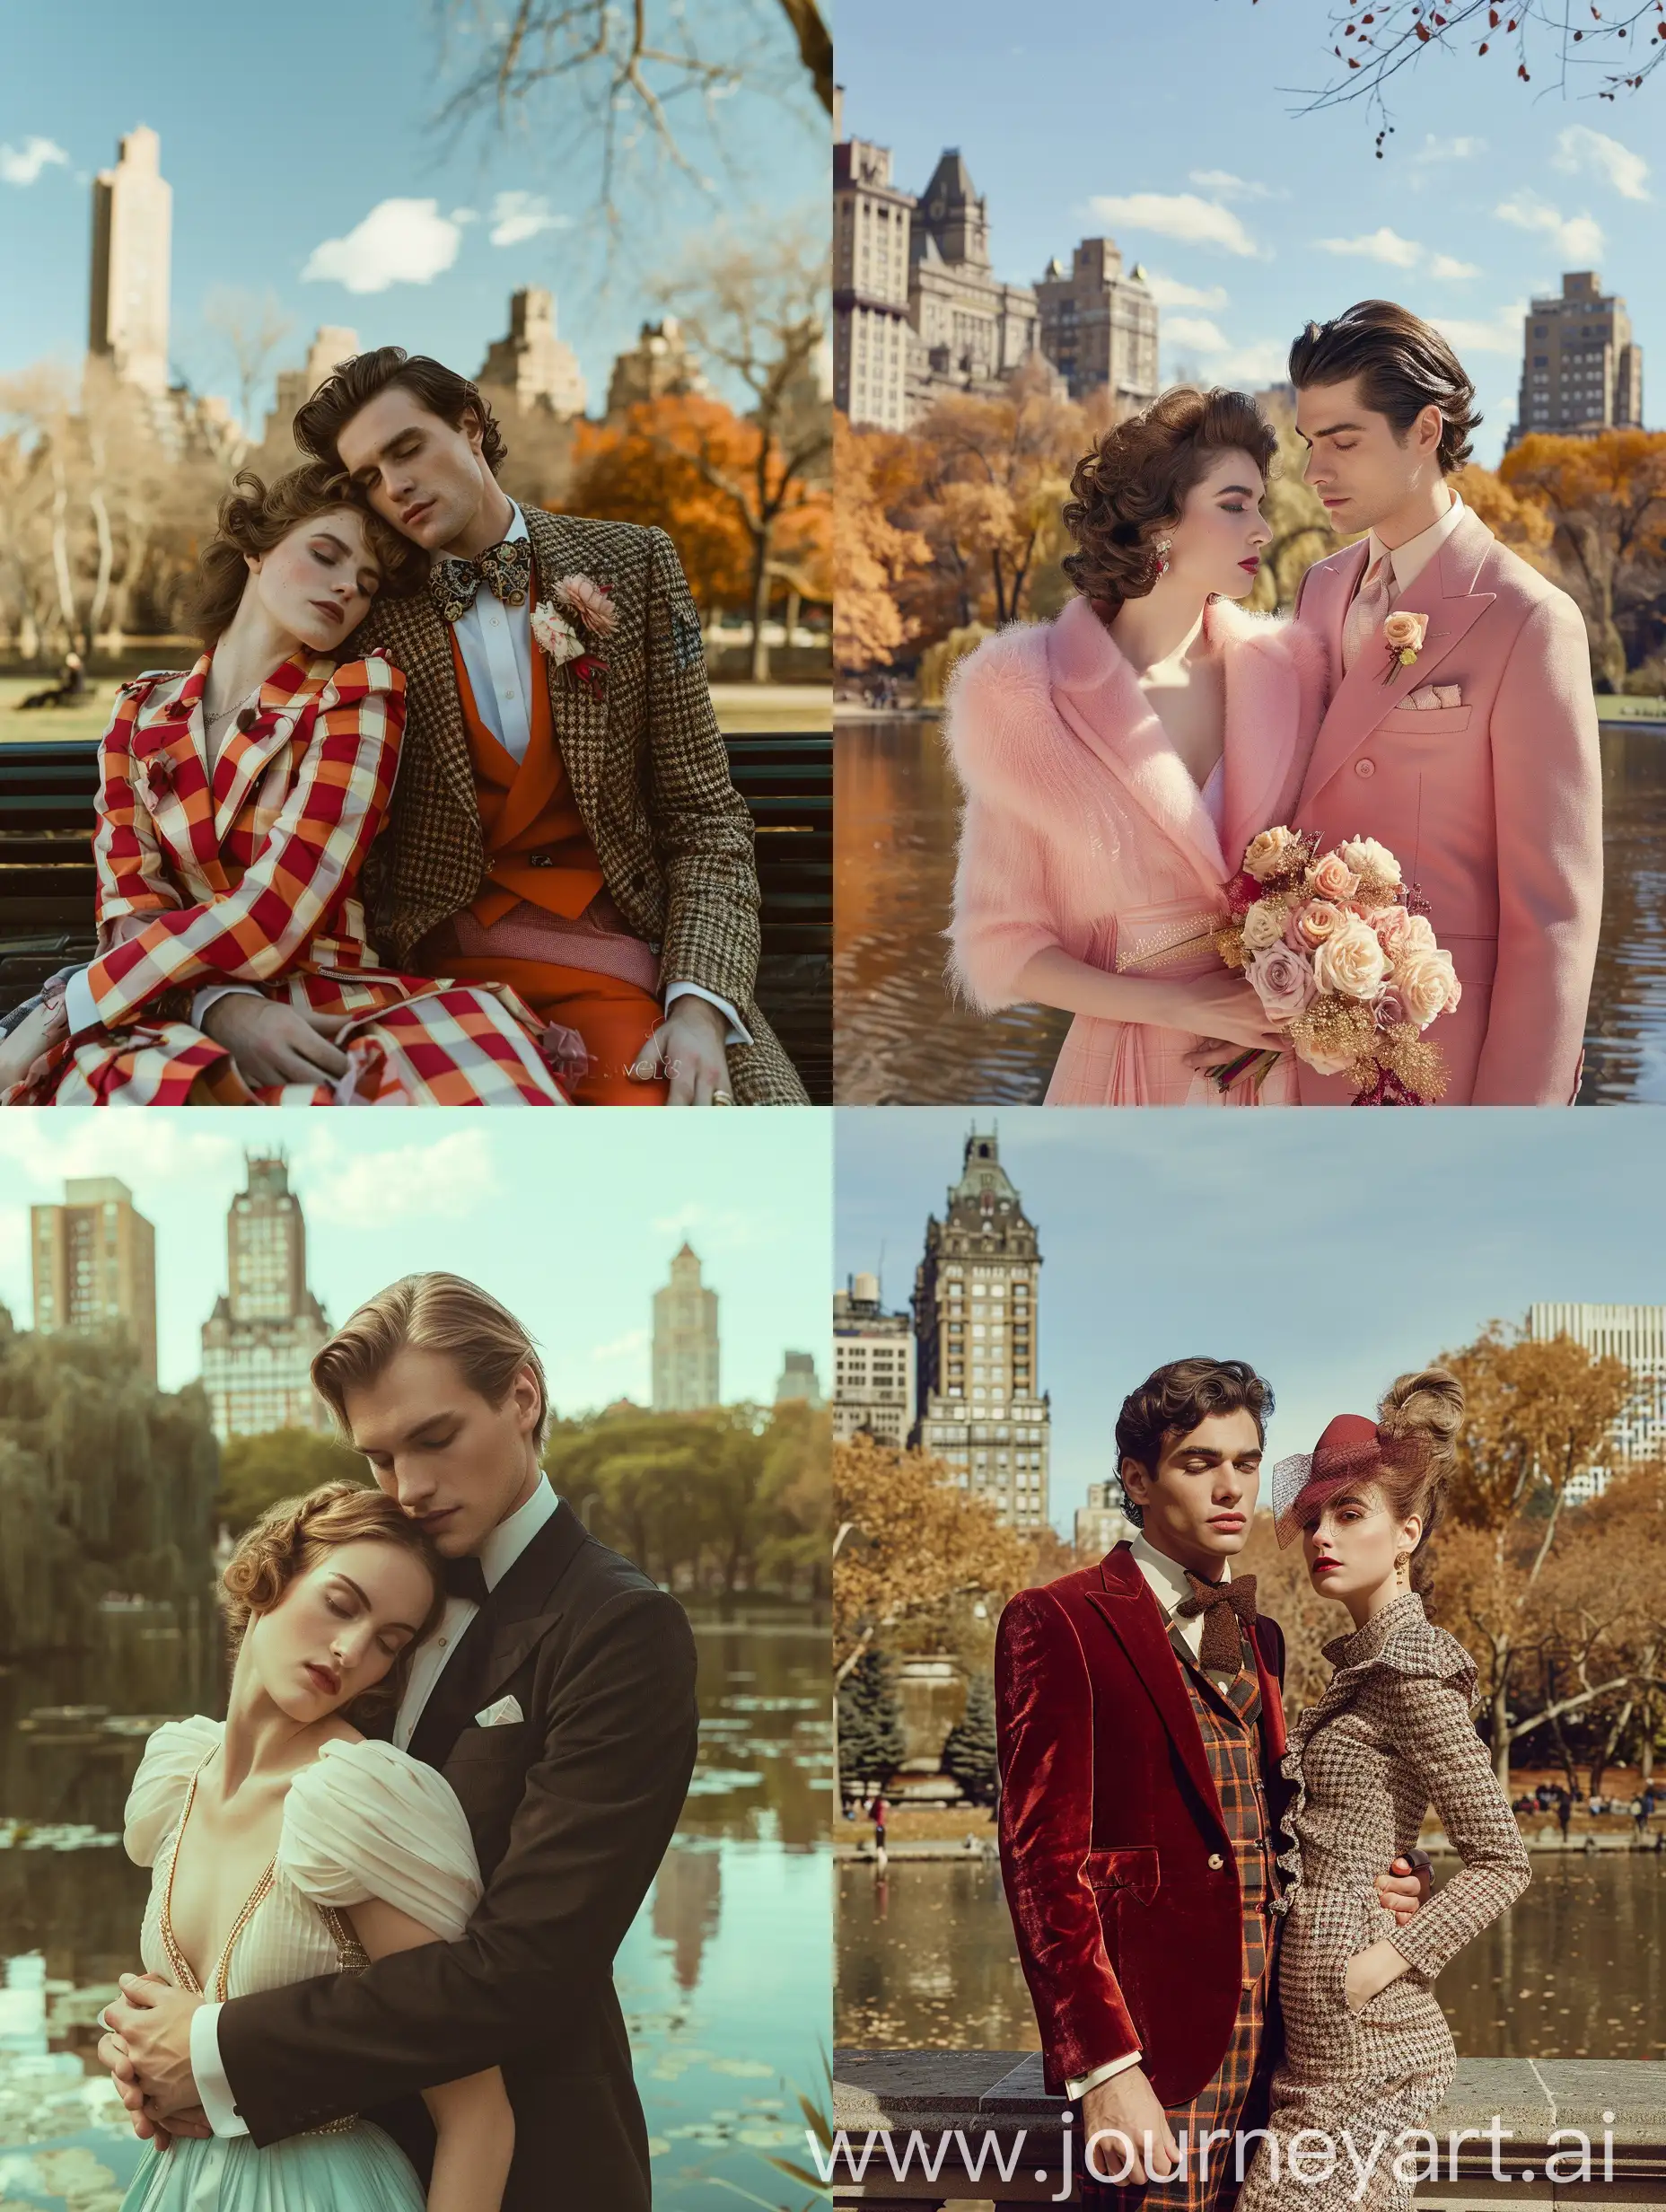 vogue photoshoot of a glamorous couple in Wes Anderson style, wes anderson color palette, central park background, realistic